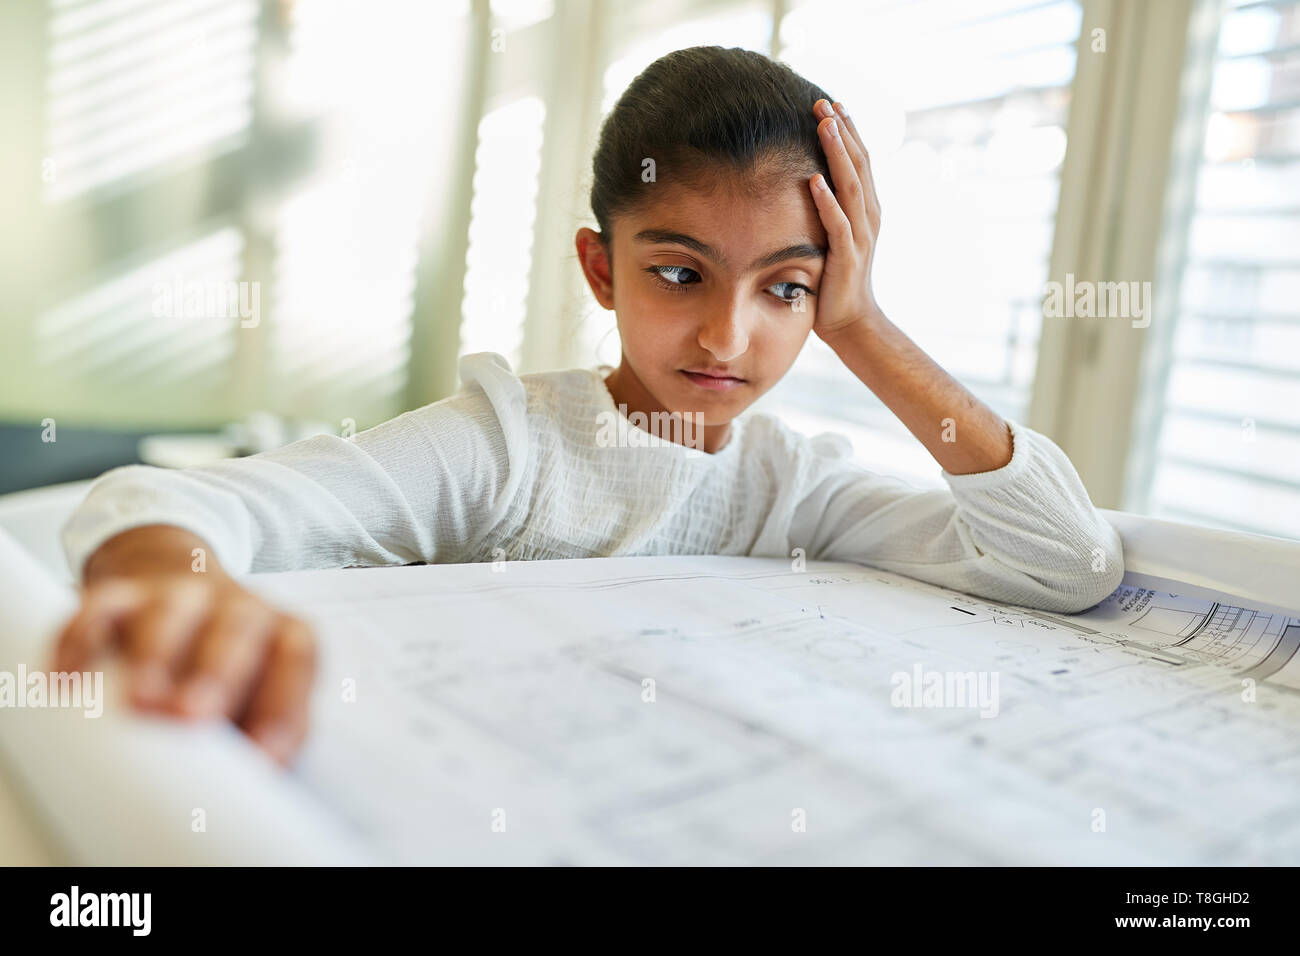 African child as an architect looks thoughtfully at a drawing Stock Photo